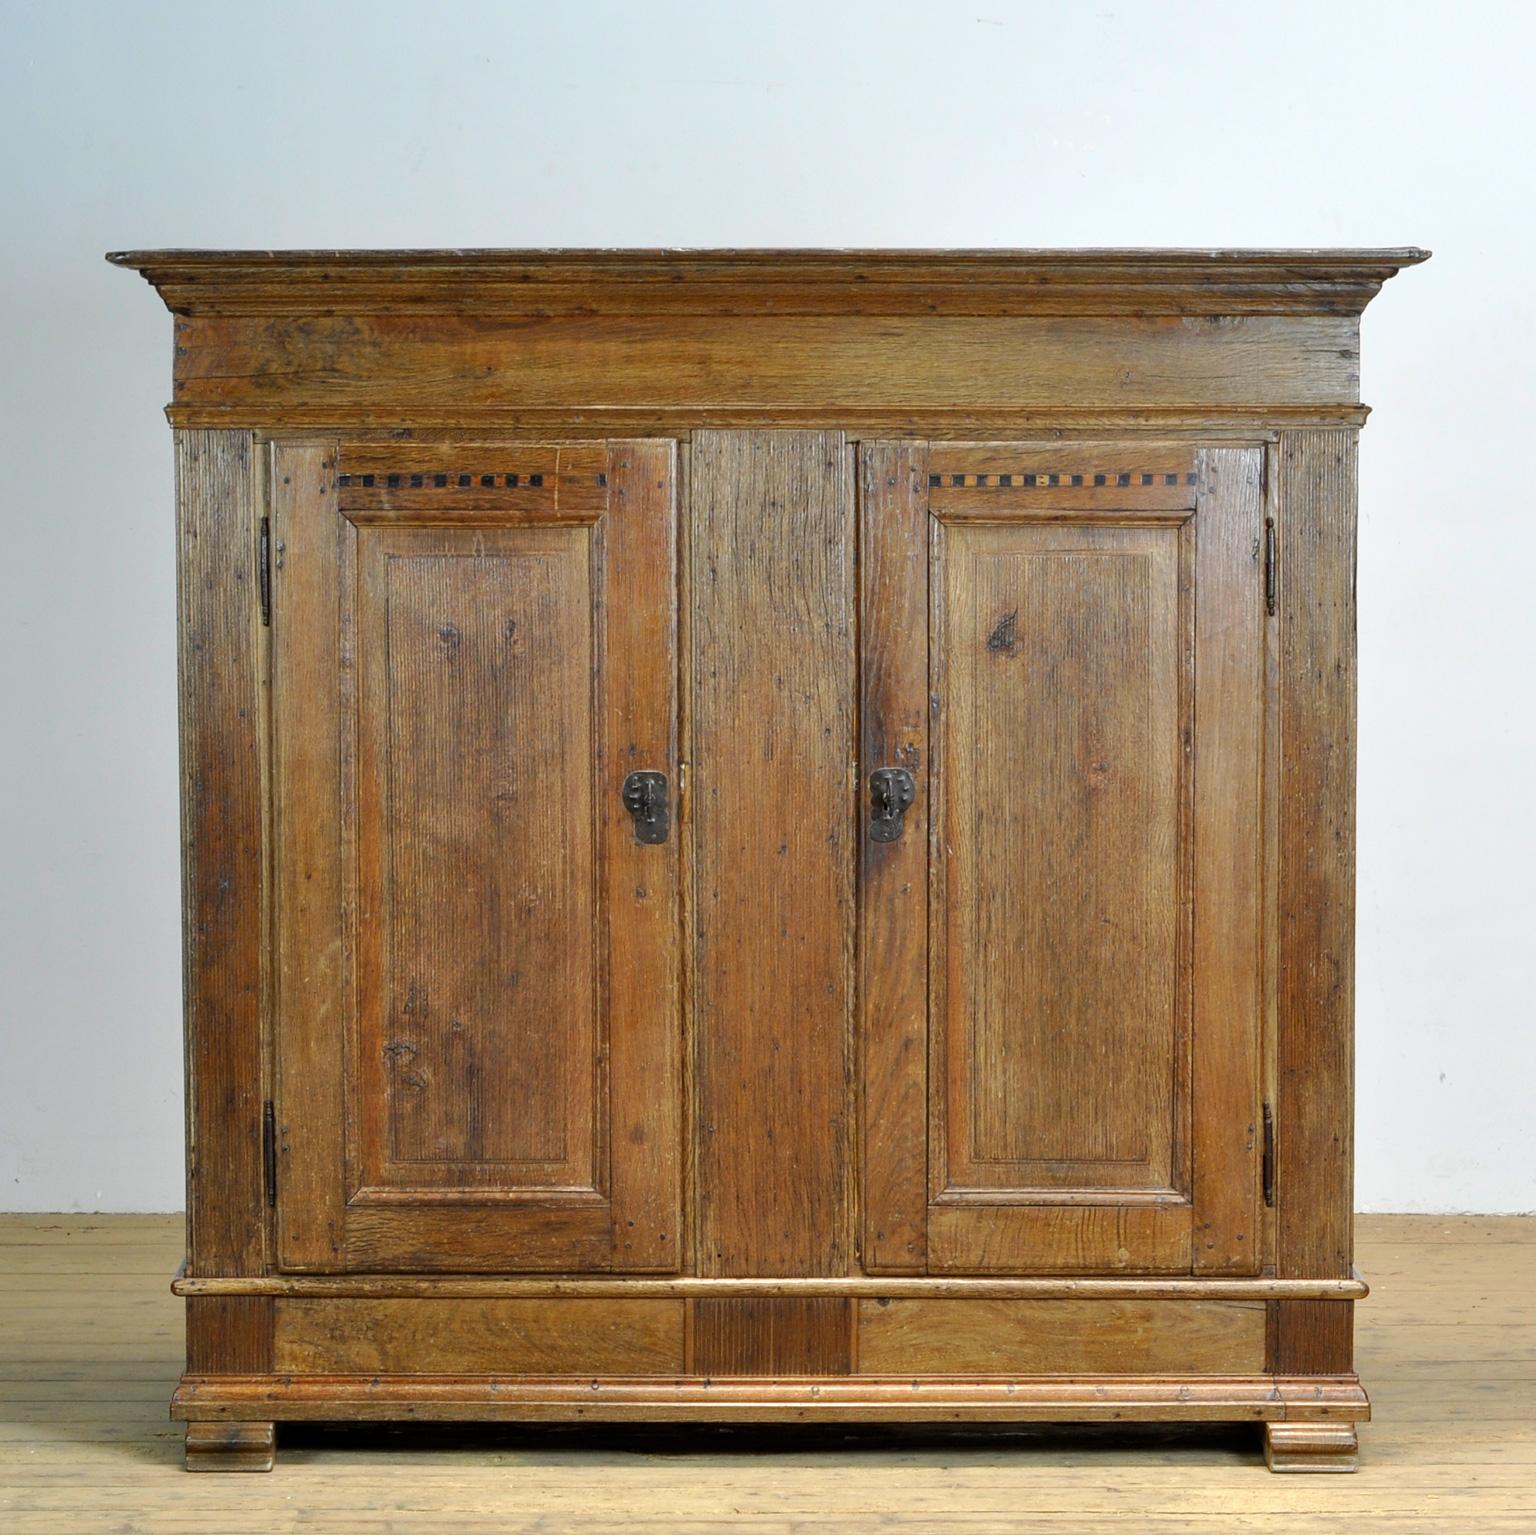 Large German cabinet from circa 1820. The cabinet is in good original condition with a beautiful patina. Solid oak two-door model with cutlery drawer and three shelves. Original fittings and keys, beautifully decorated doors with inlaid wood and